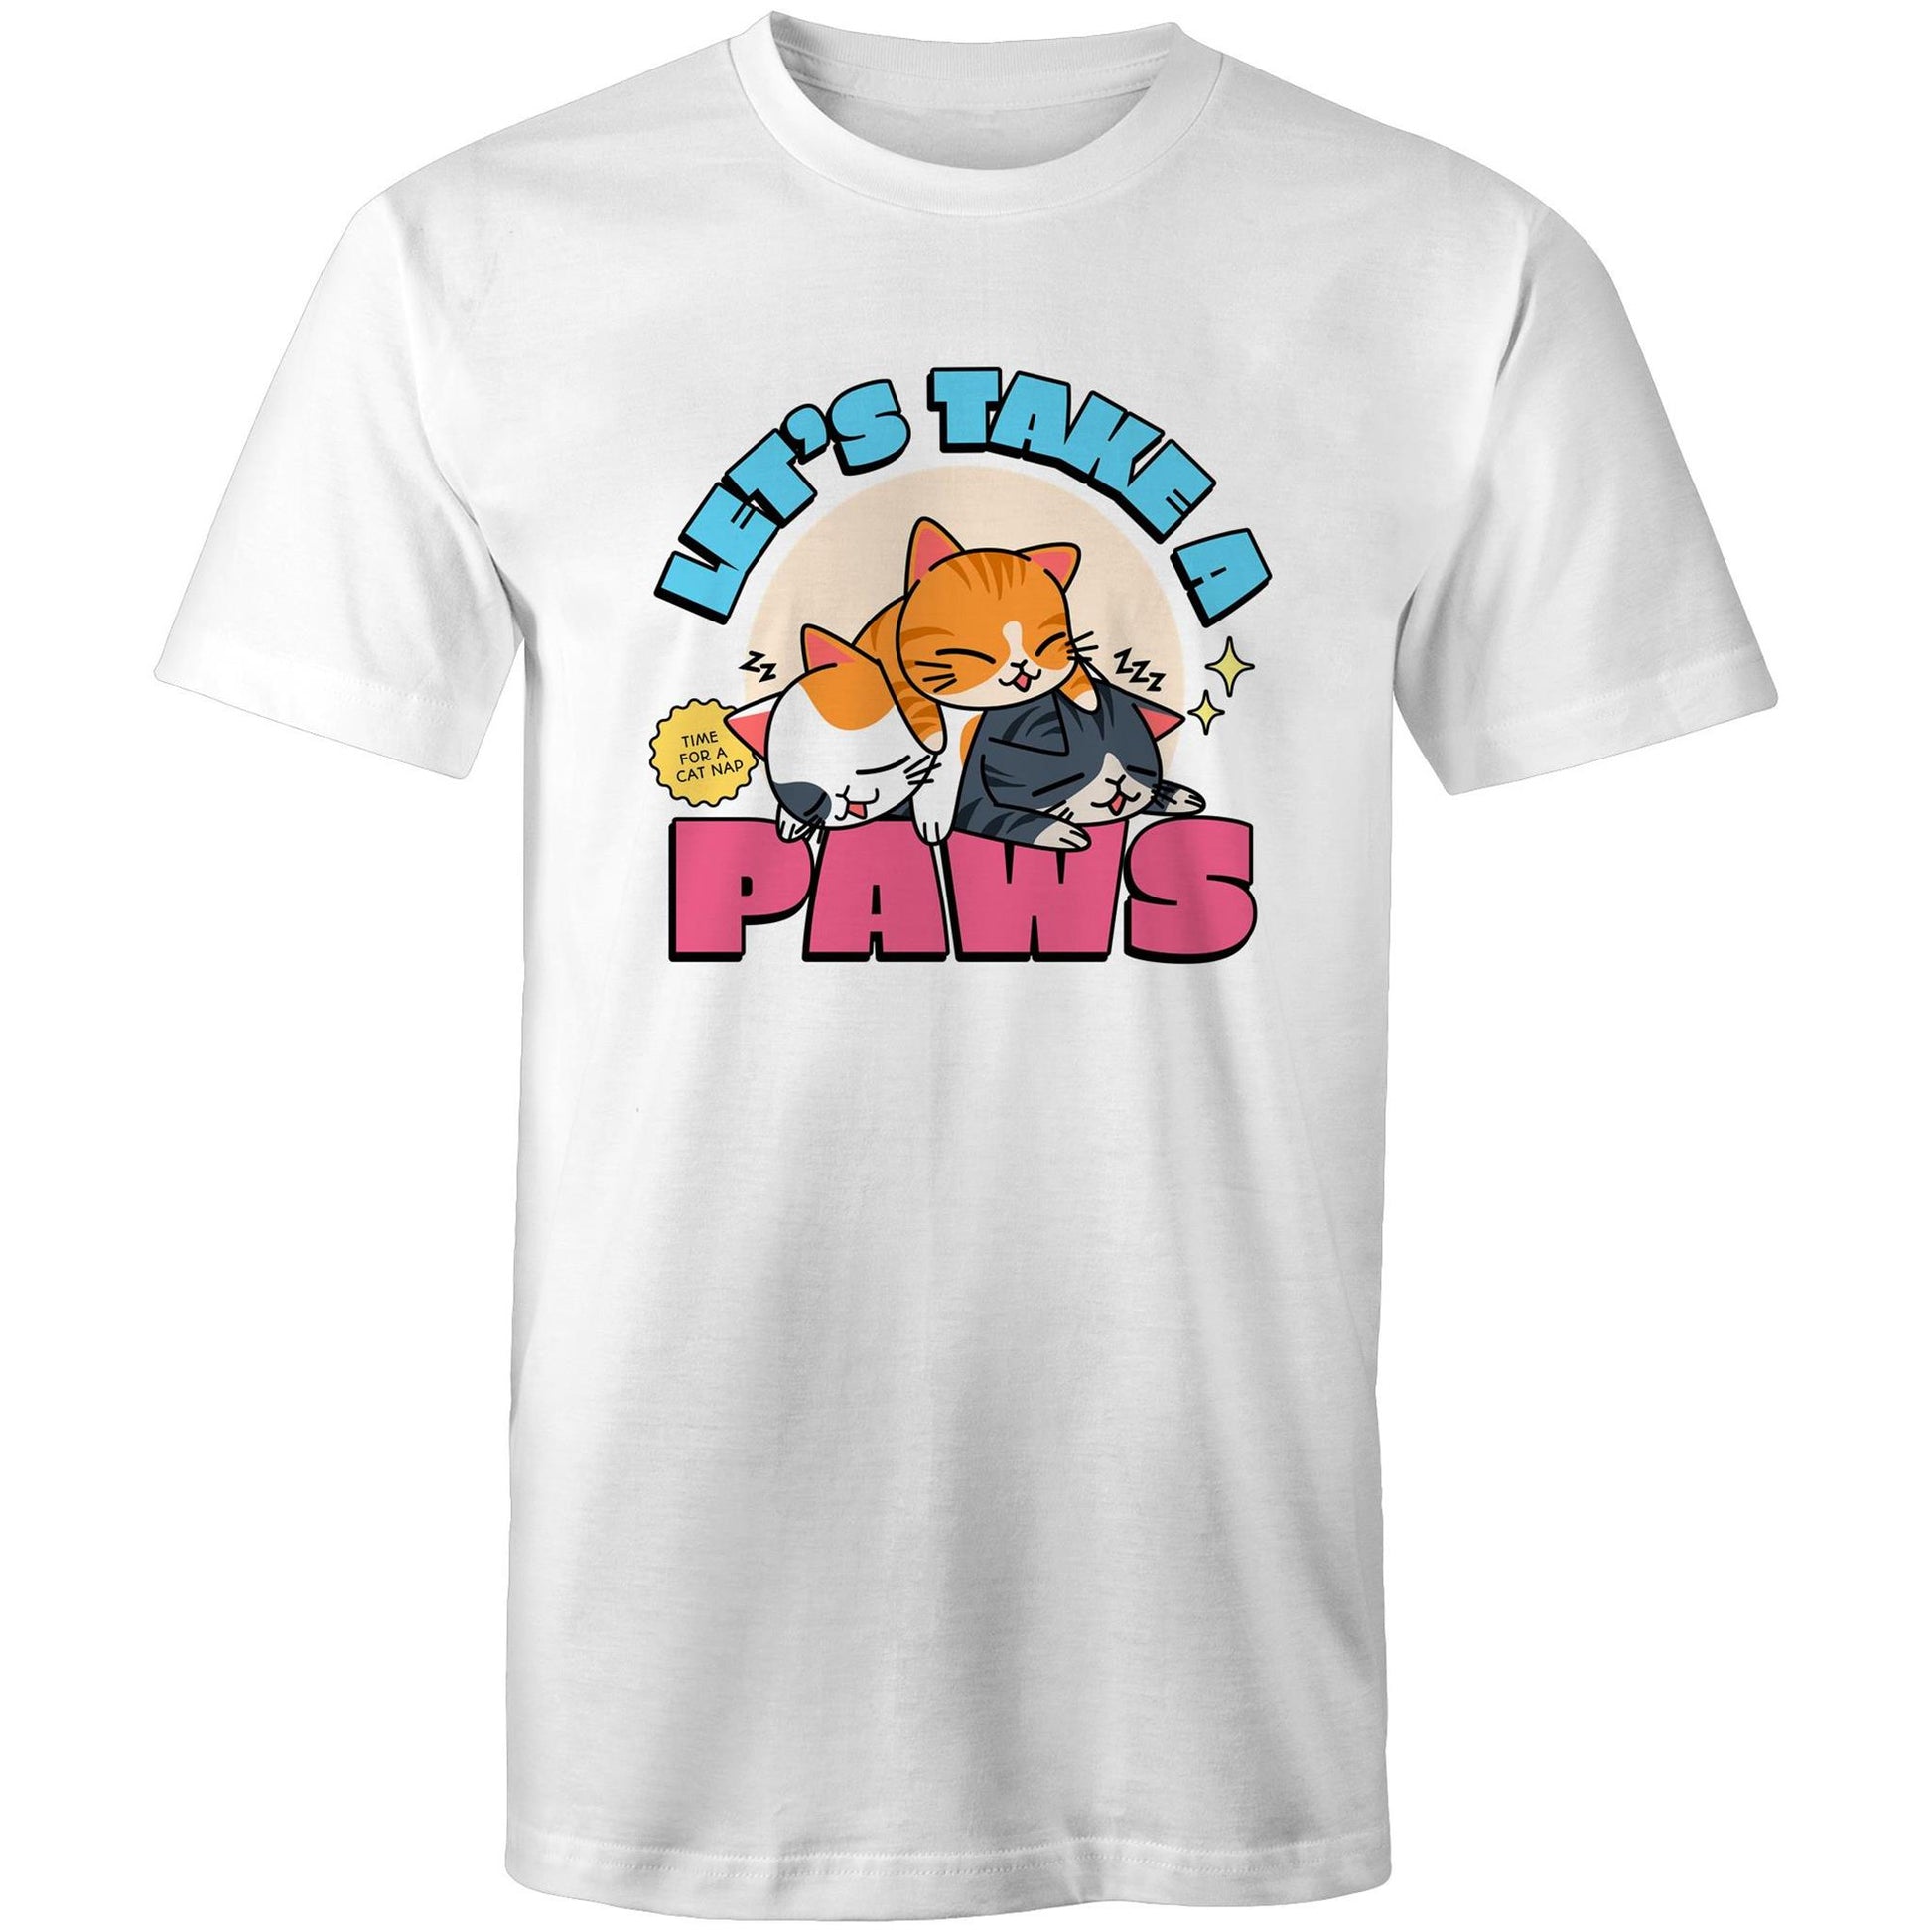 Let's Take A Paws, Time For A Cat Nap - Mens T-Shirt White Mens T-shirt animal